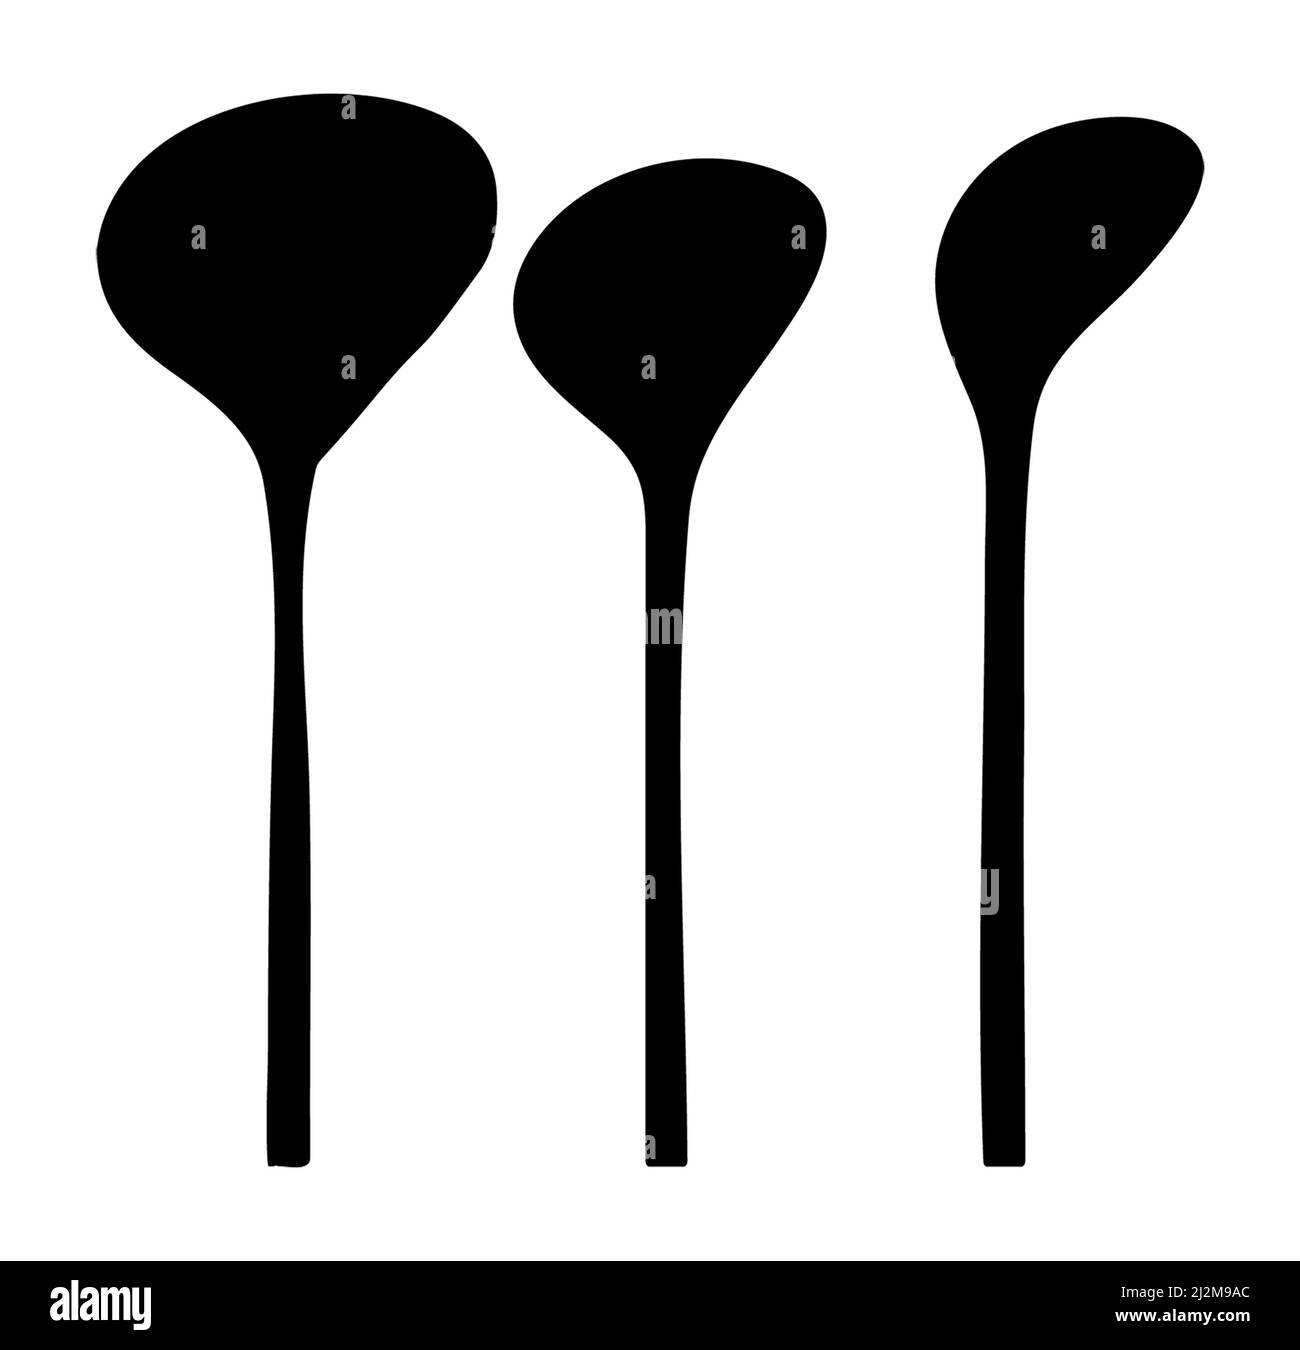 3 golf club silhouette graphics on a white background design elements for this sport. Stock Photo